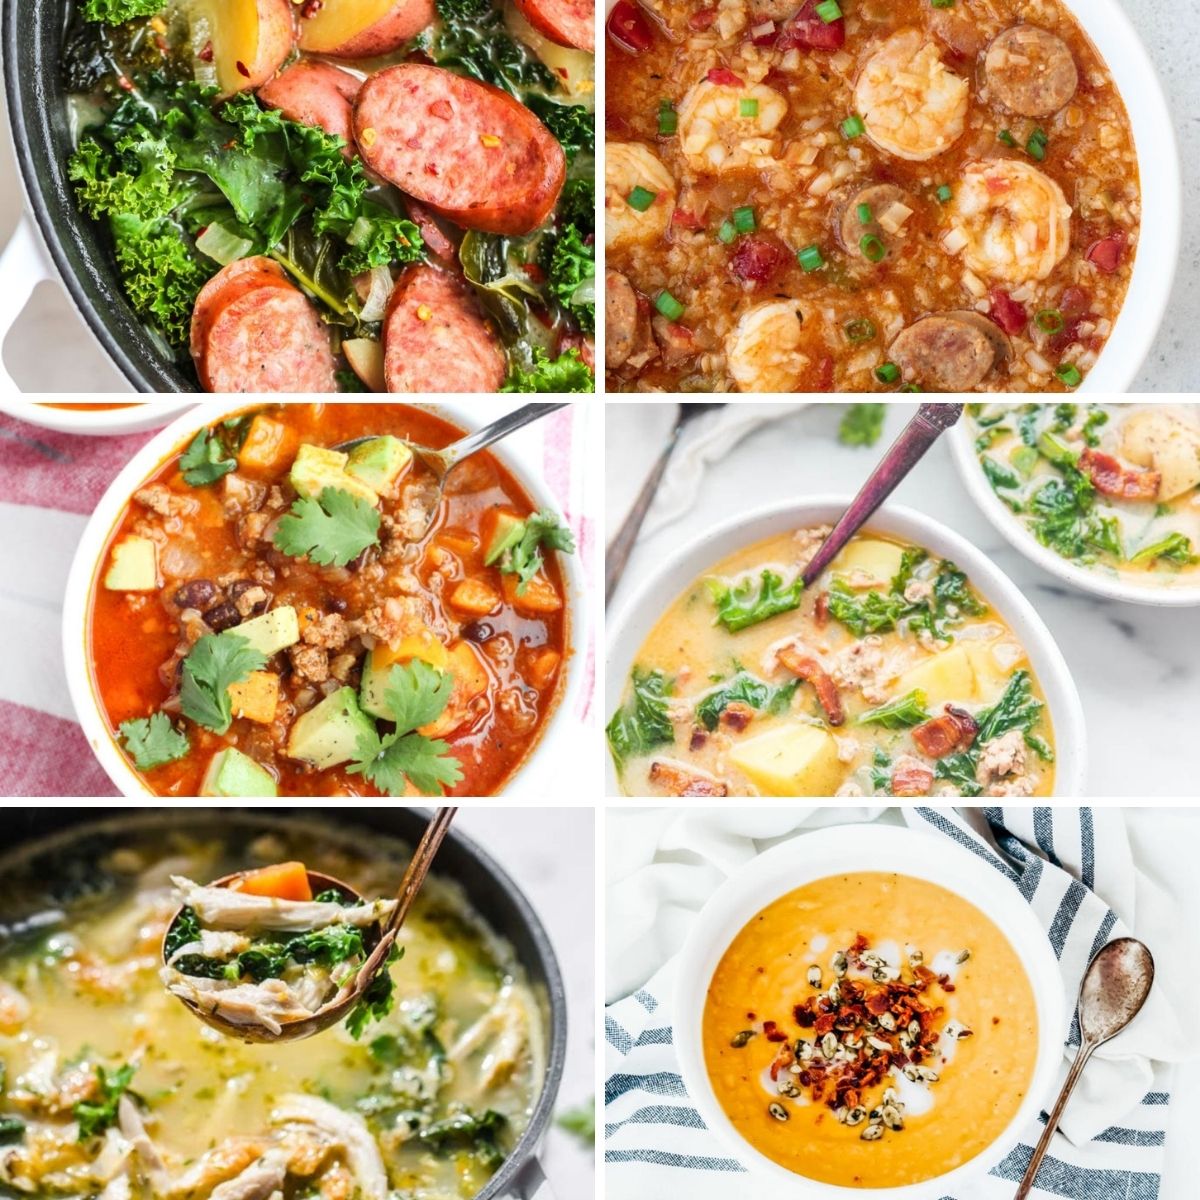 35 of the Best Vegetarian Slow Cooker Recipes - 40 Aprons